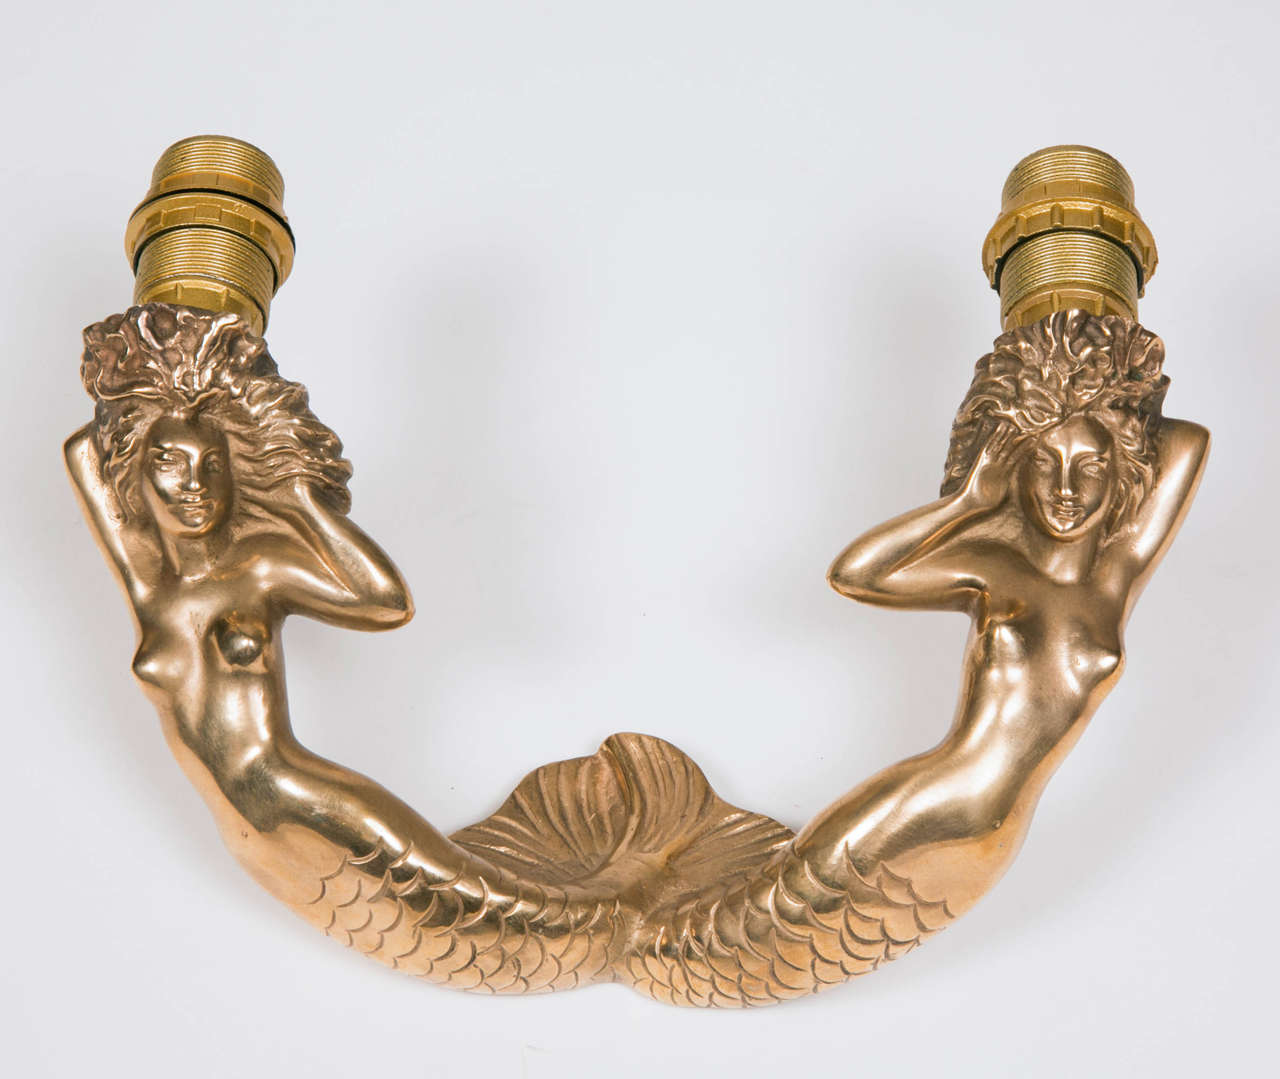 Very nice pair of solid bronze sconces by Raoul Scarpa
Two pairs are available.